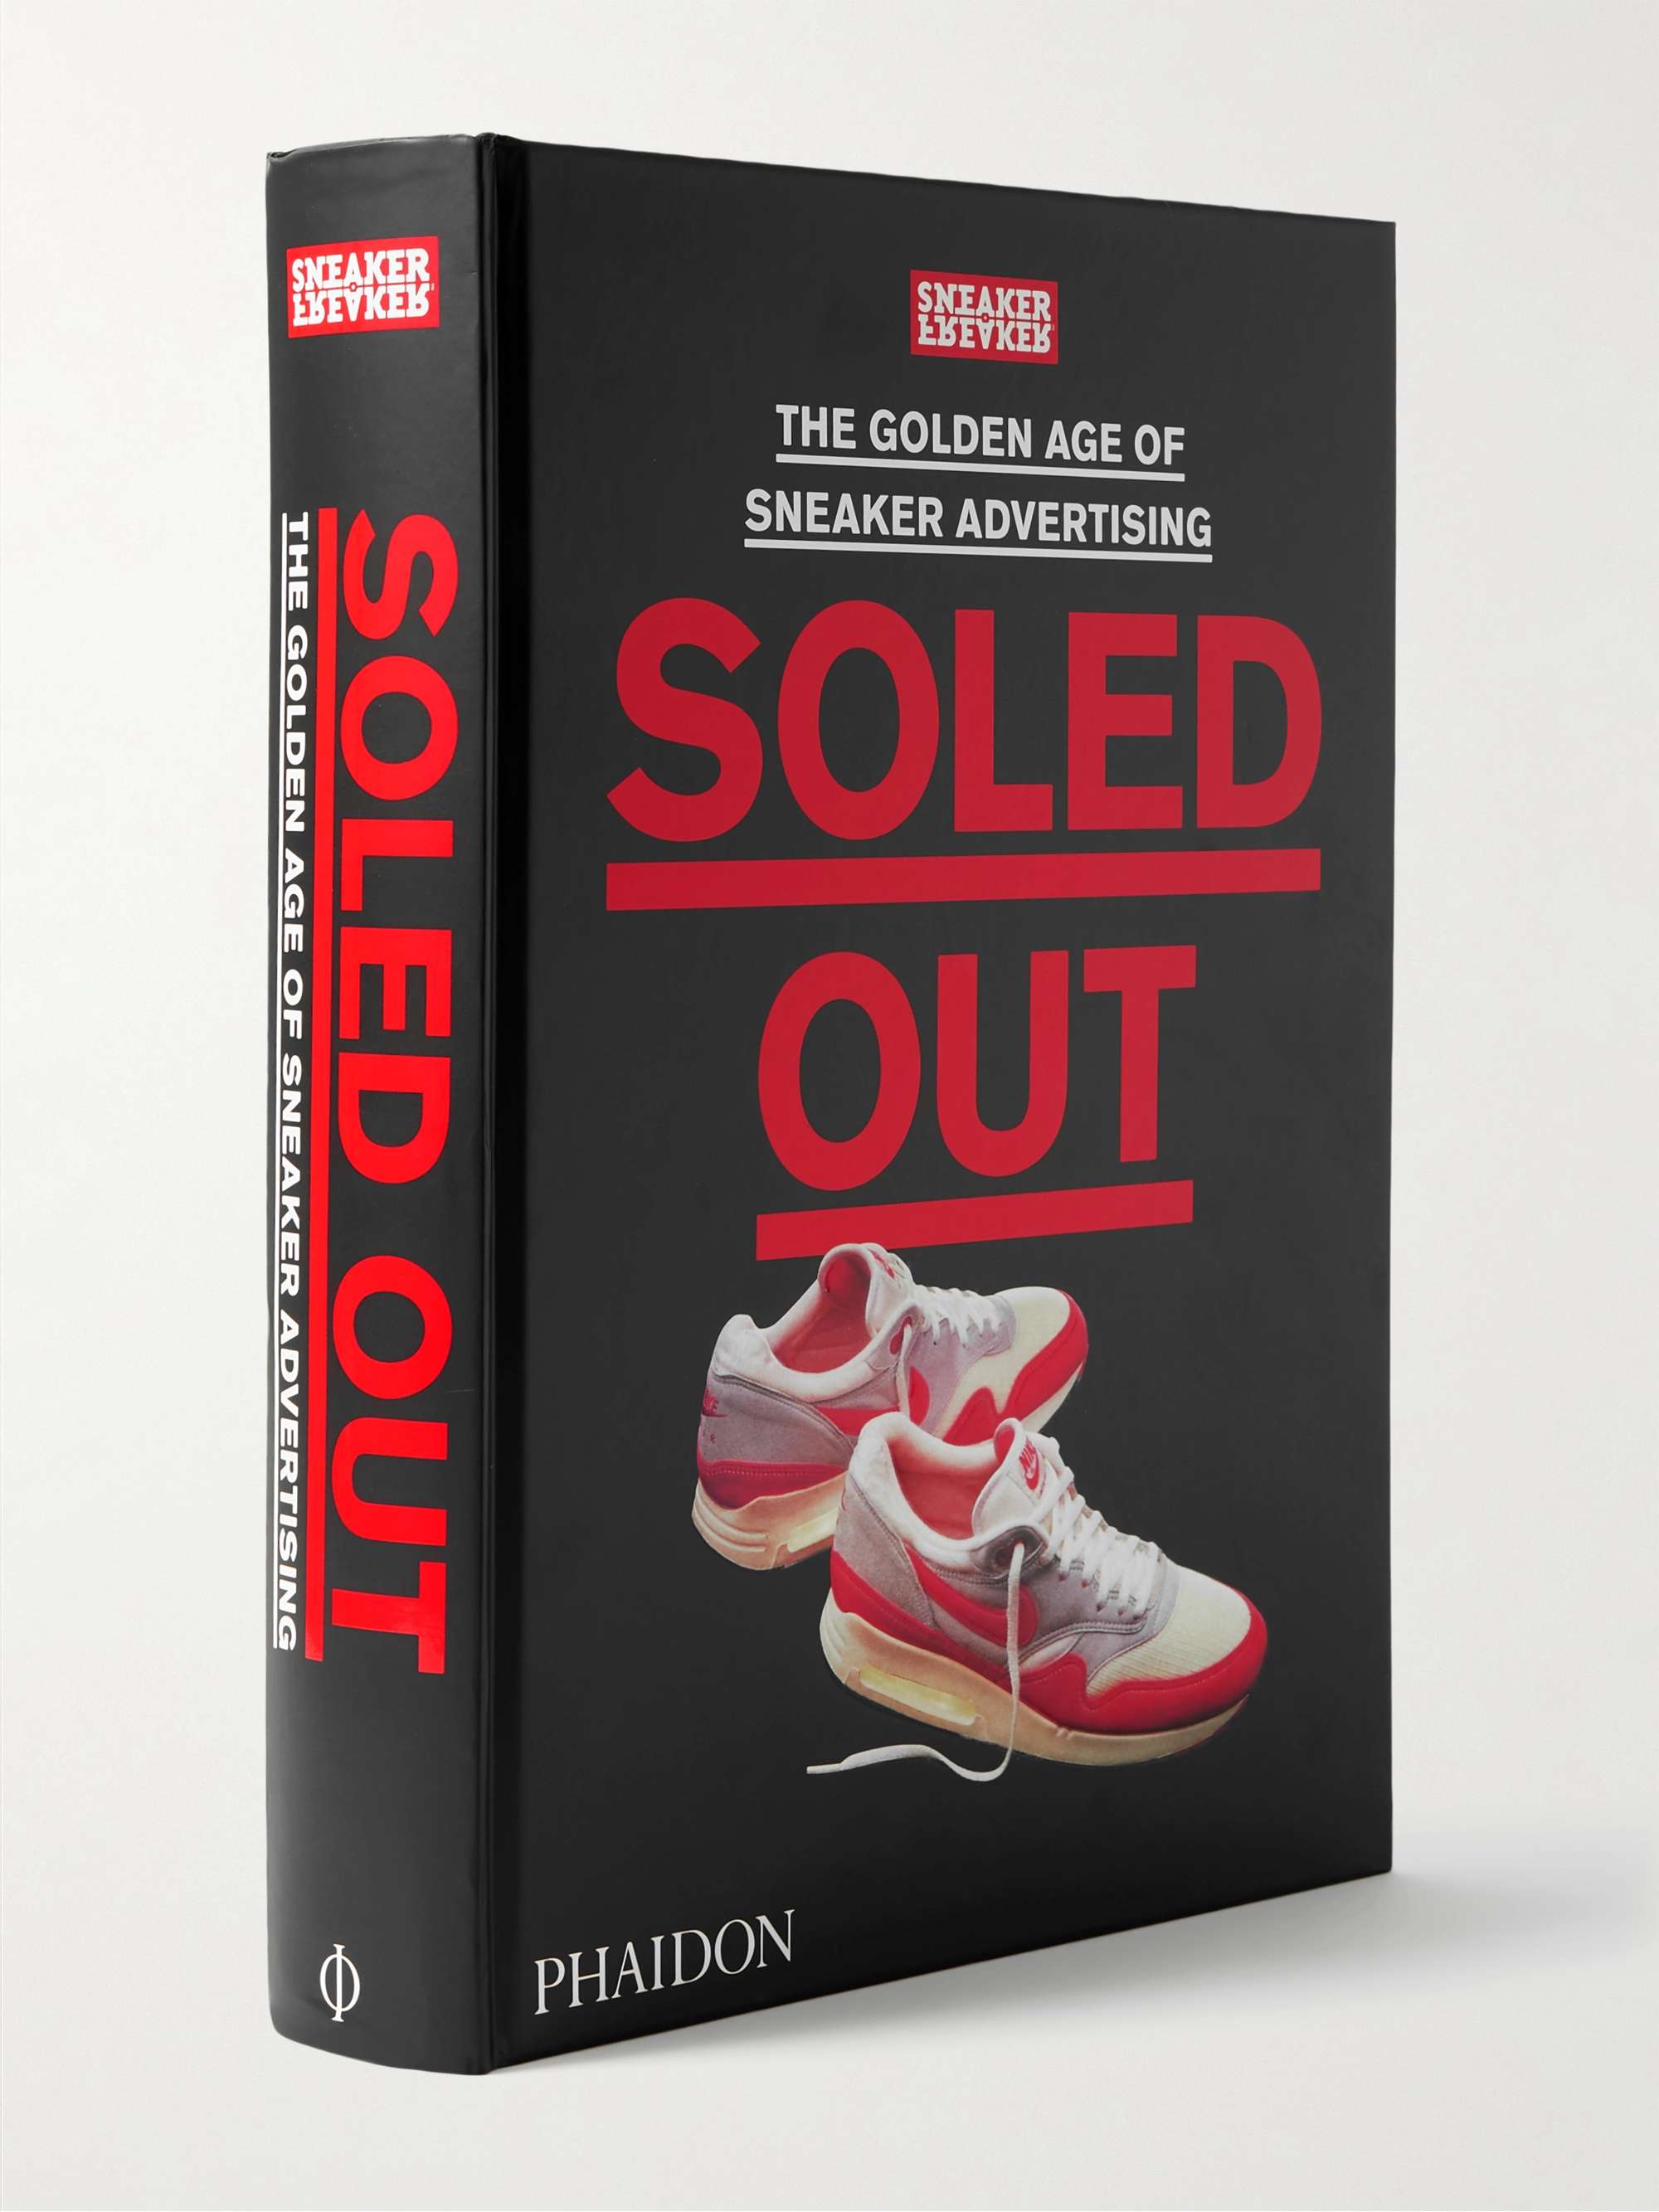 PHAIDON Soled Out: The Golden Age of Sneaker Advertising Hardcover Book |  MR PORTER